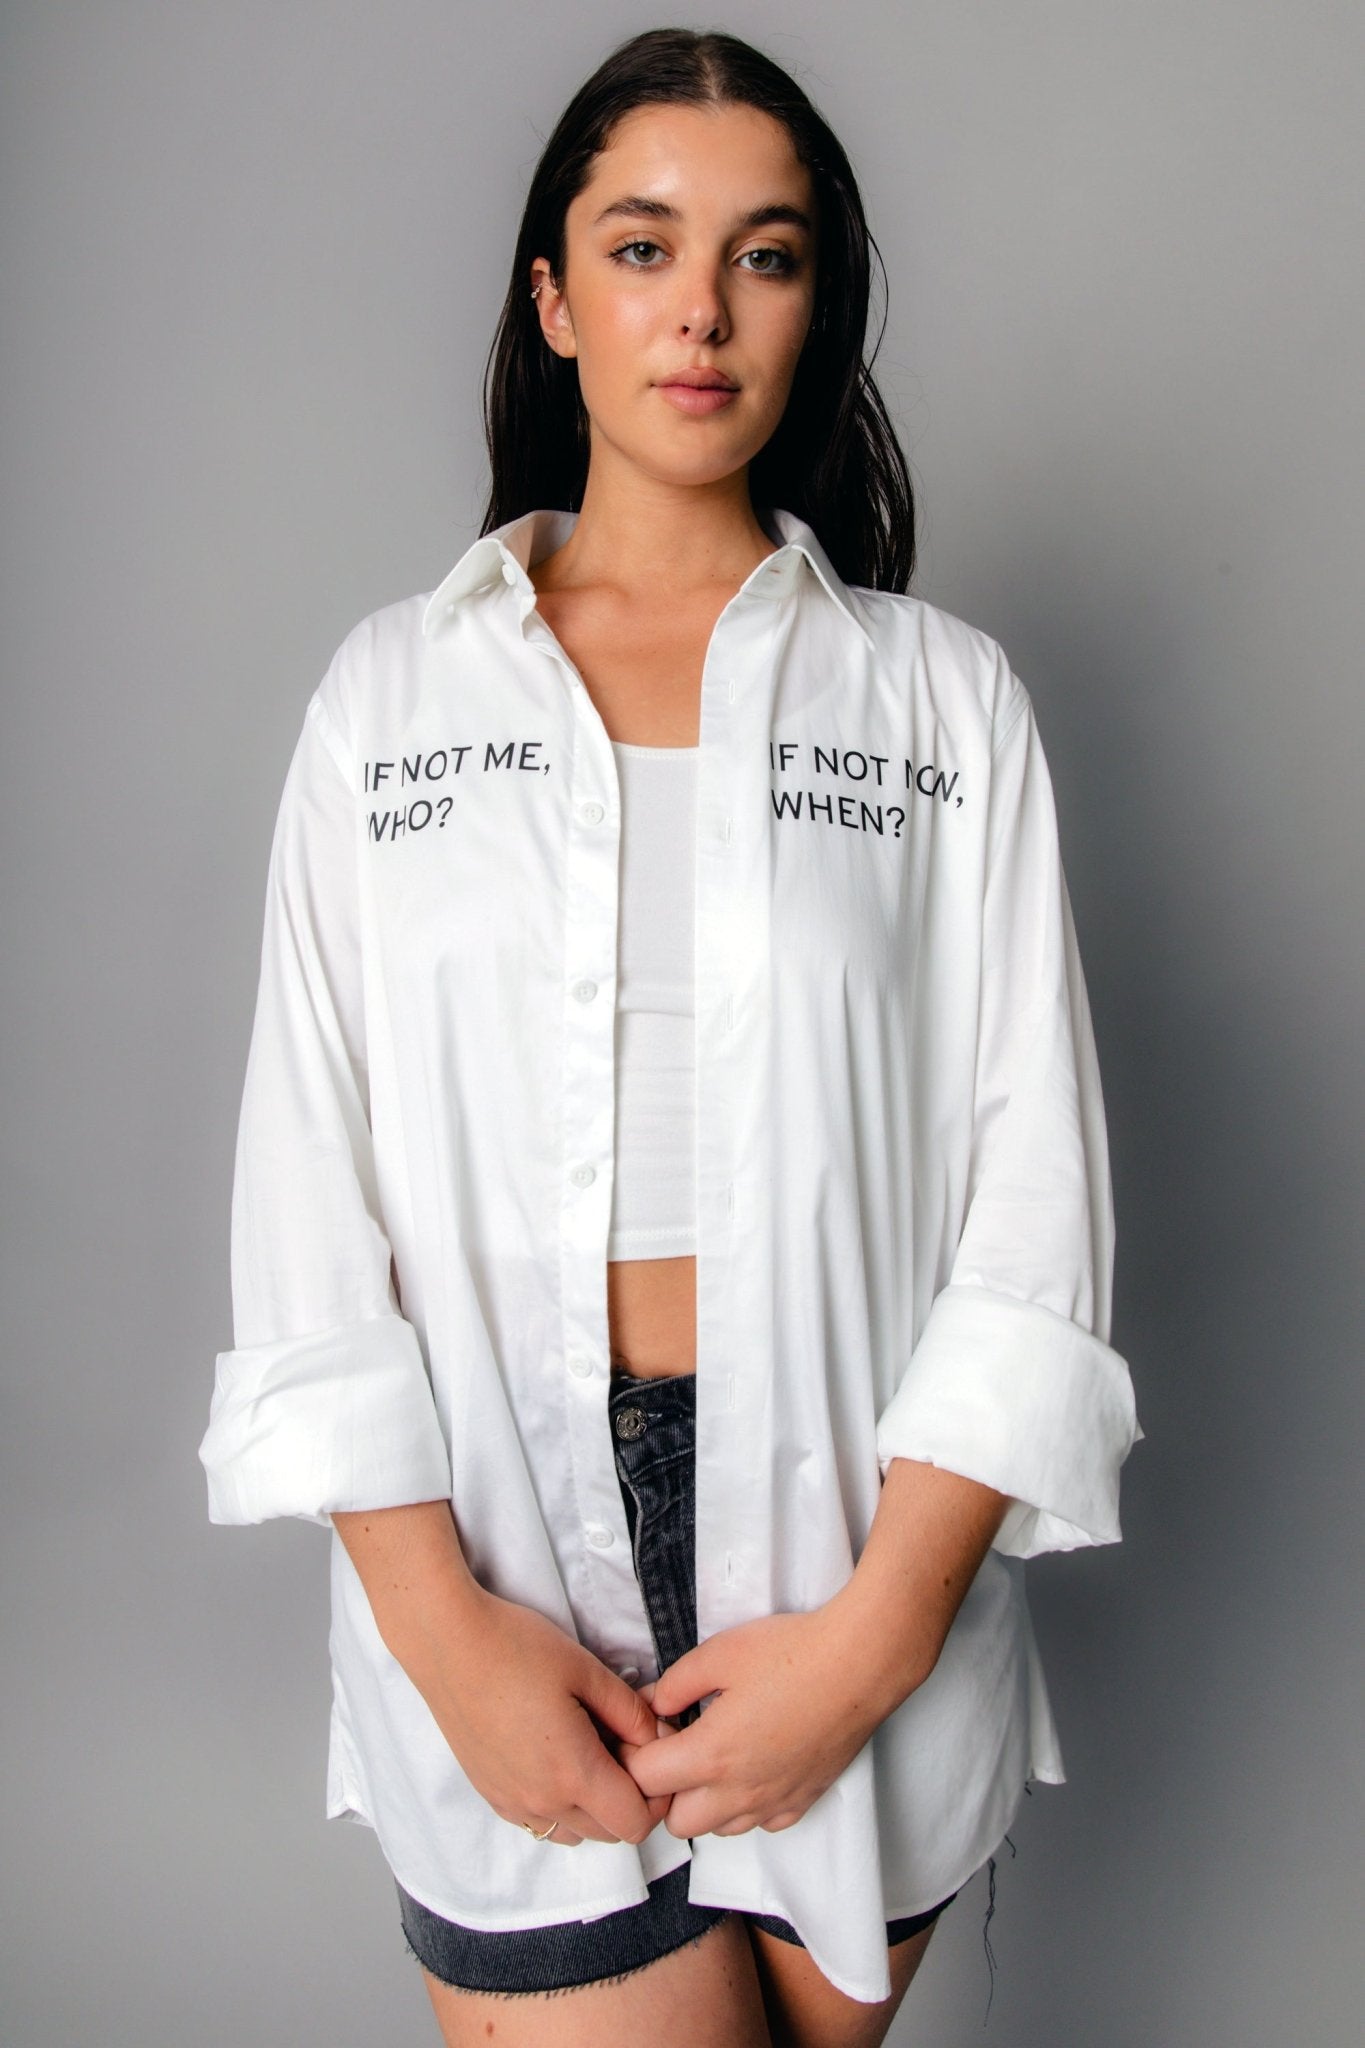 Upcycled White Shirt 'IF NOT ME, WHO? IF NOT NOW, WHEN?' - OBLIVIOUS?